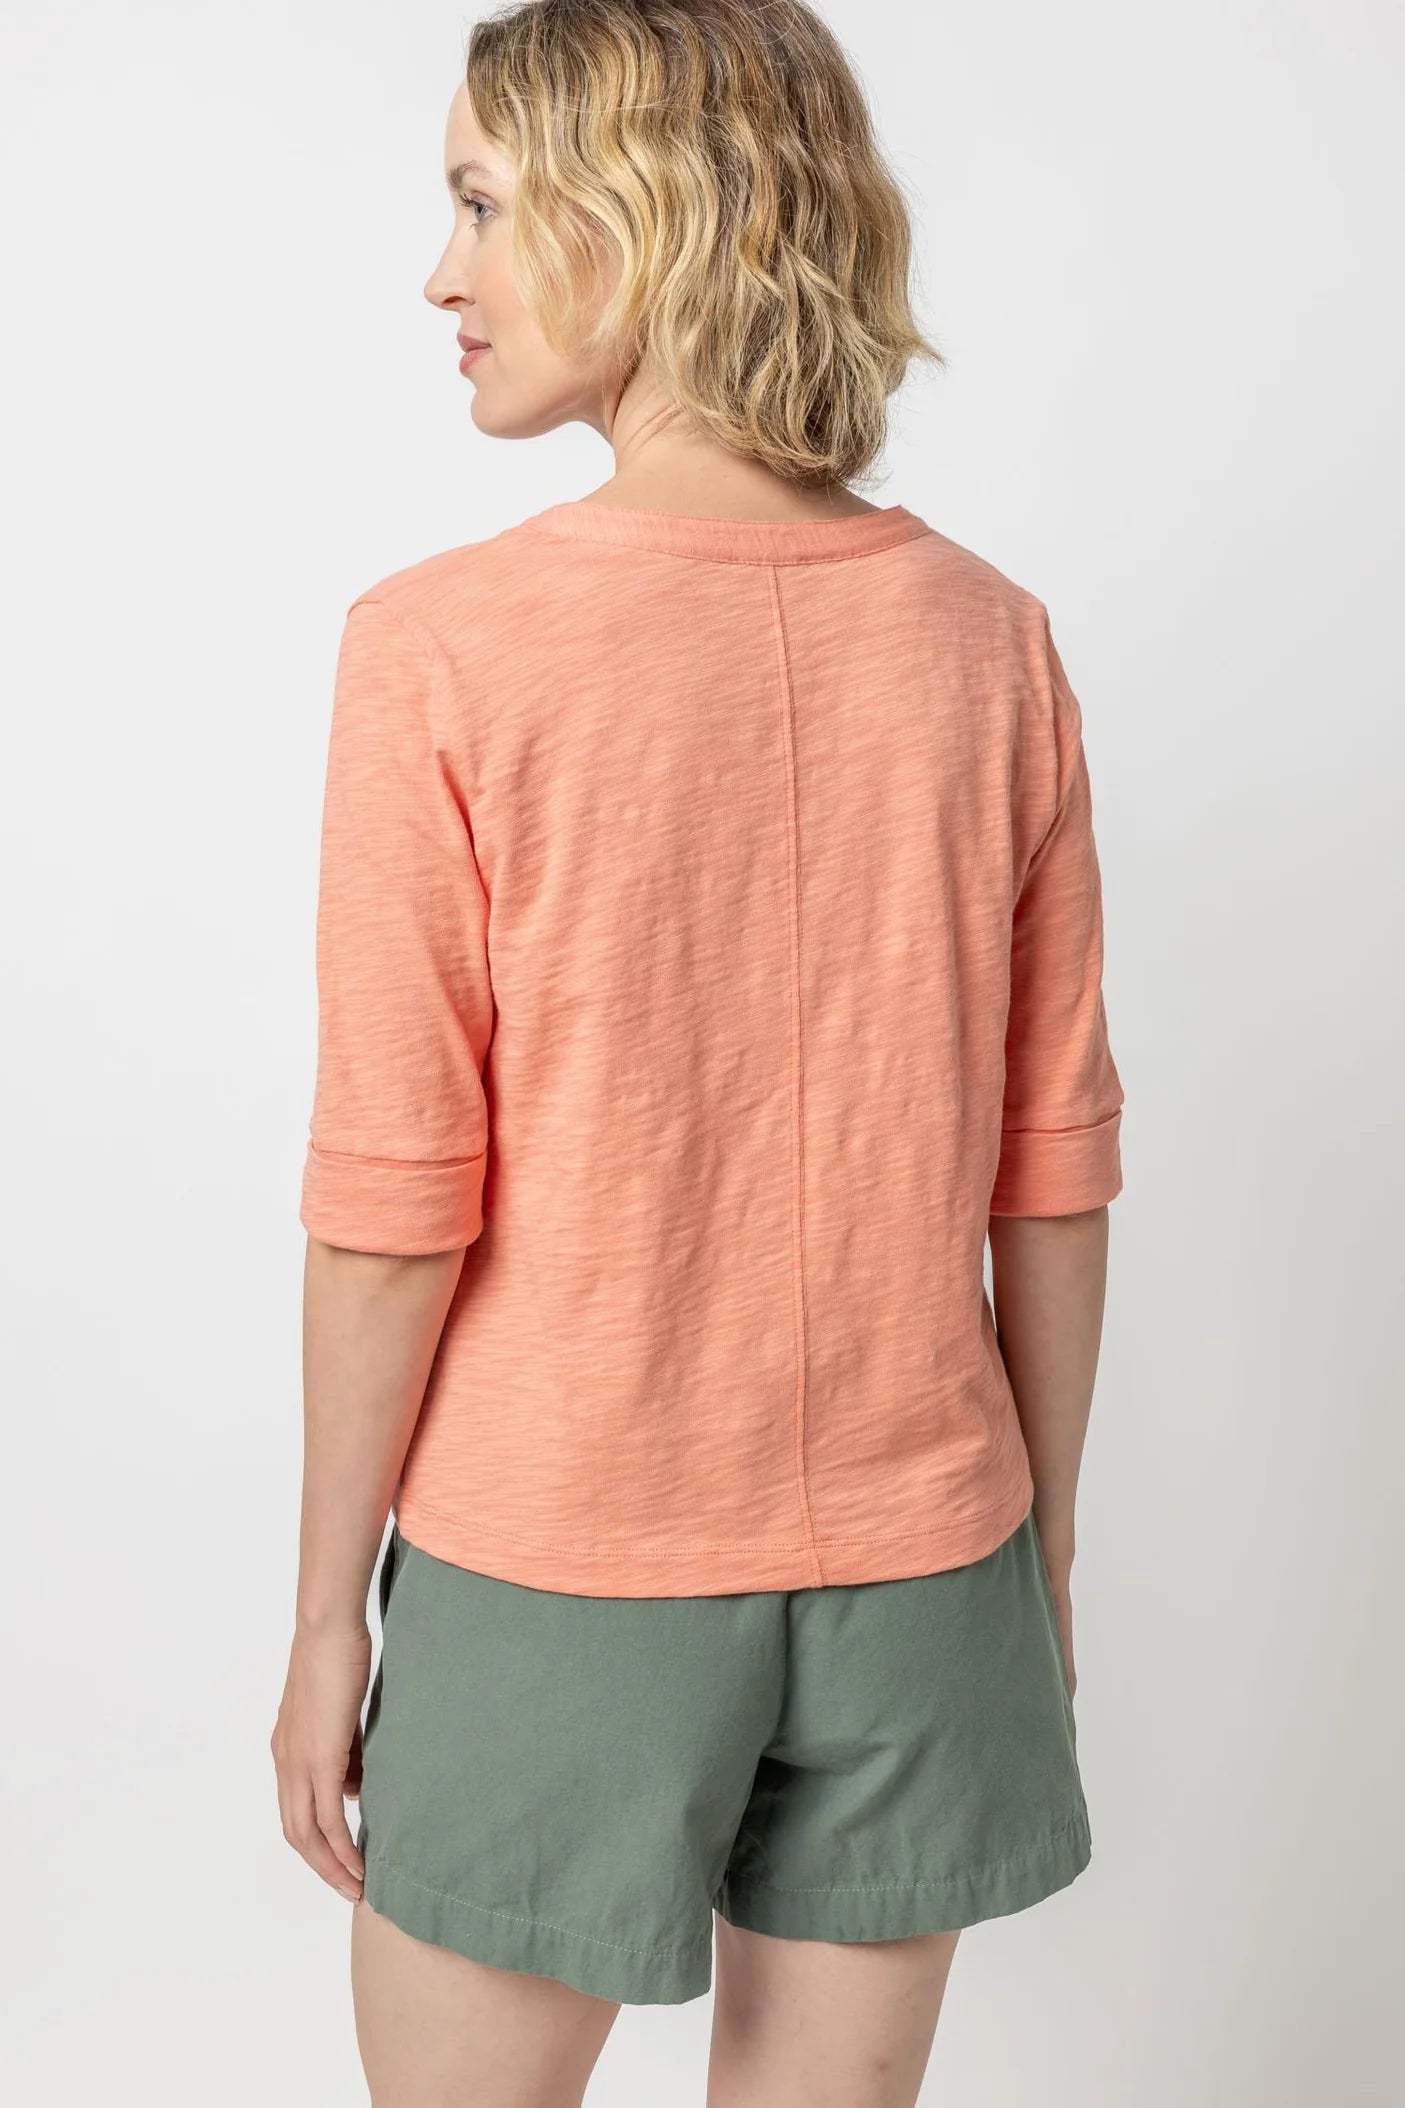 Elbow Sleeve Split Neck Tee in sunset by Lilla P